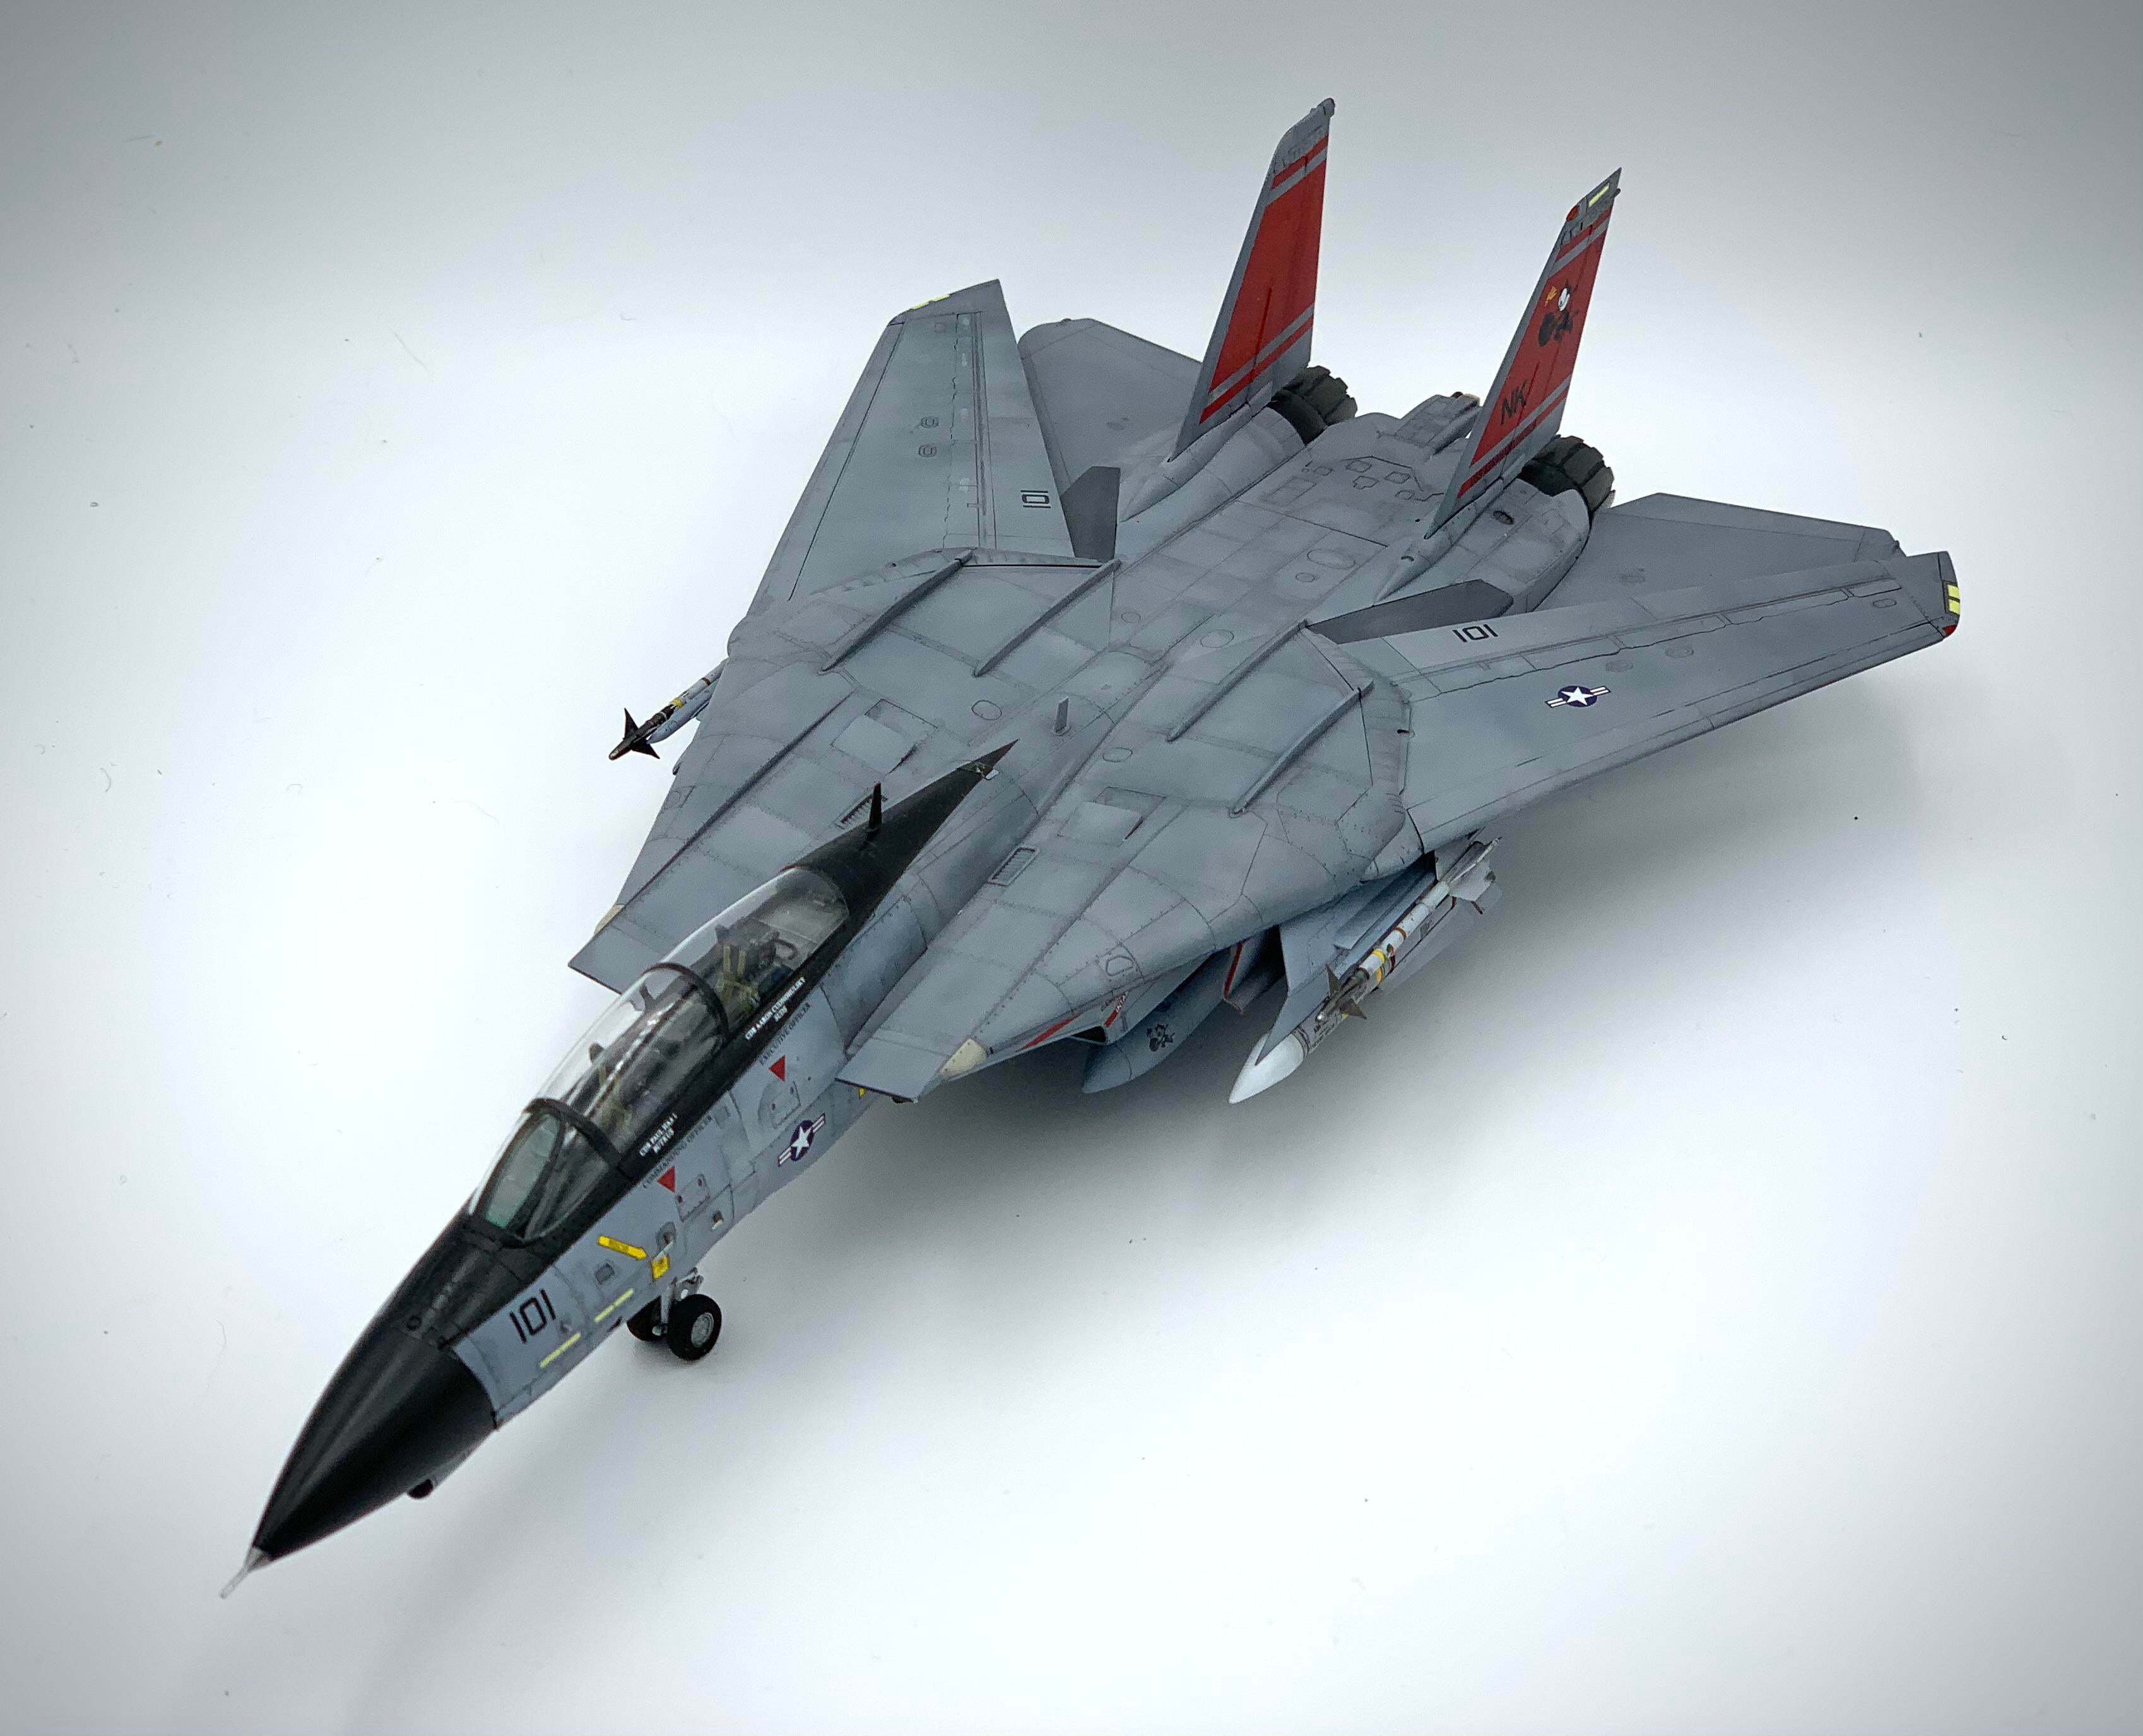 F-14D (1/72 Great Wall) from VF-31 Azni